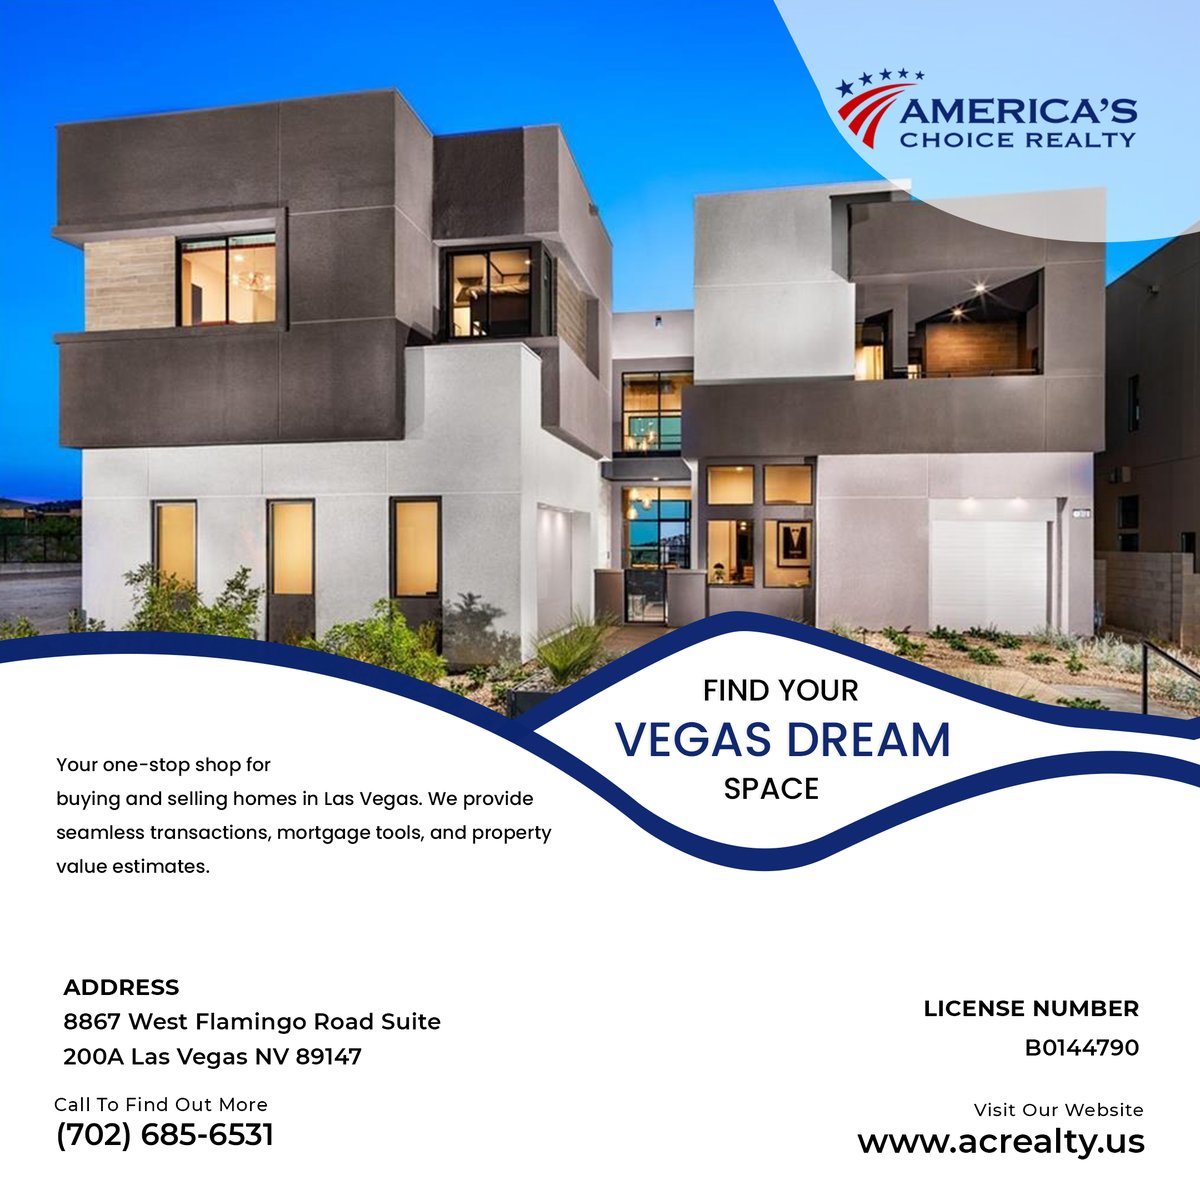 Discover Your Perfect Haven: Where Your Vegas Dreams Come True. Let Us Guide You to Your Ideal Space.
.
.
#realestateusa #realestate #realestateagent #realestateinvesting #realestatelife #realestateinvestor #realestatebroker #realestategoals #realestateexpert